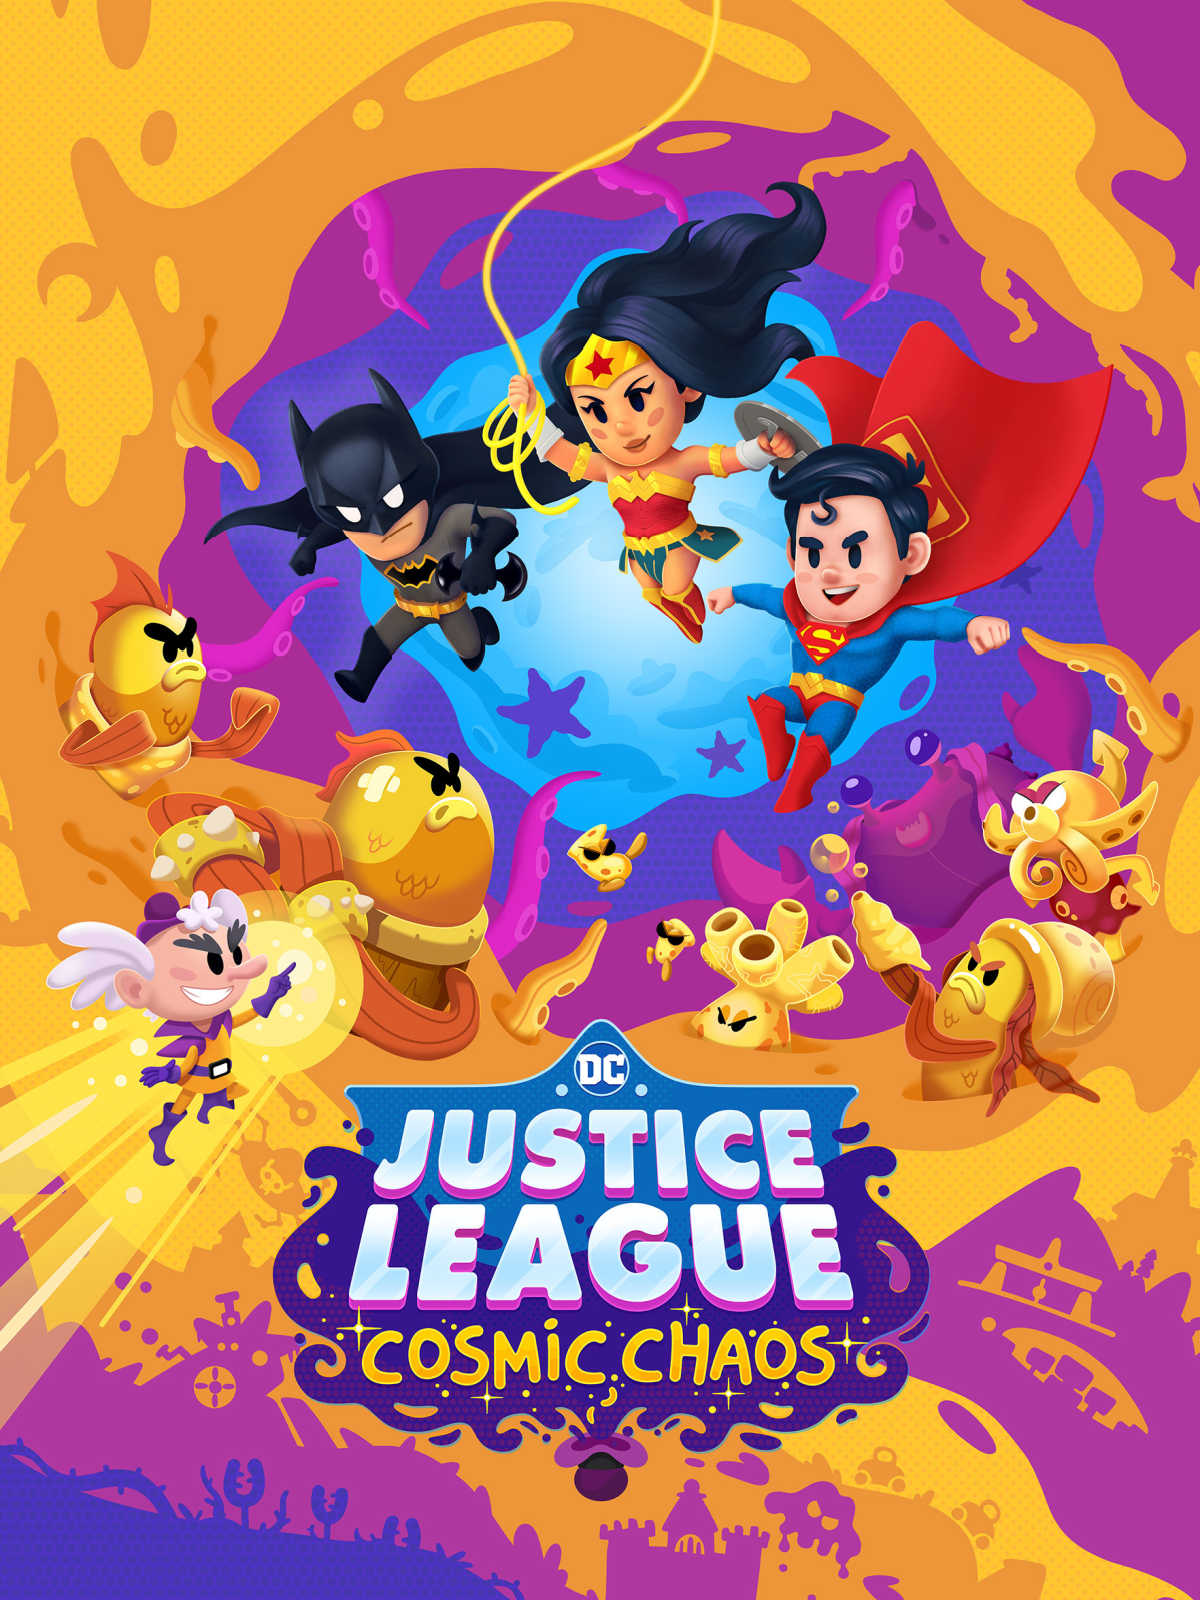 DC Justice League Cosmic Chaos is a fun family-friendly action-adventure game that features your kid's favorite superheroes from the Justice League.